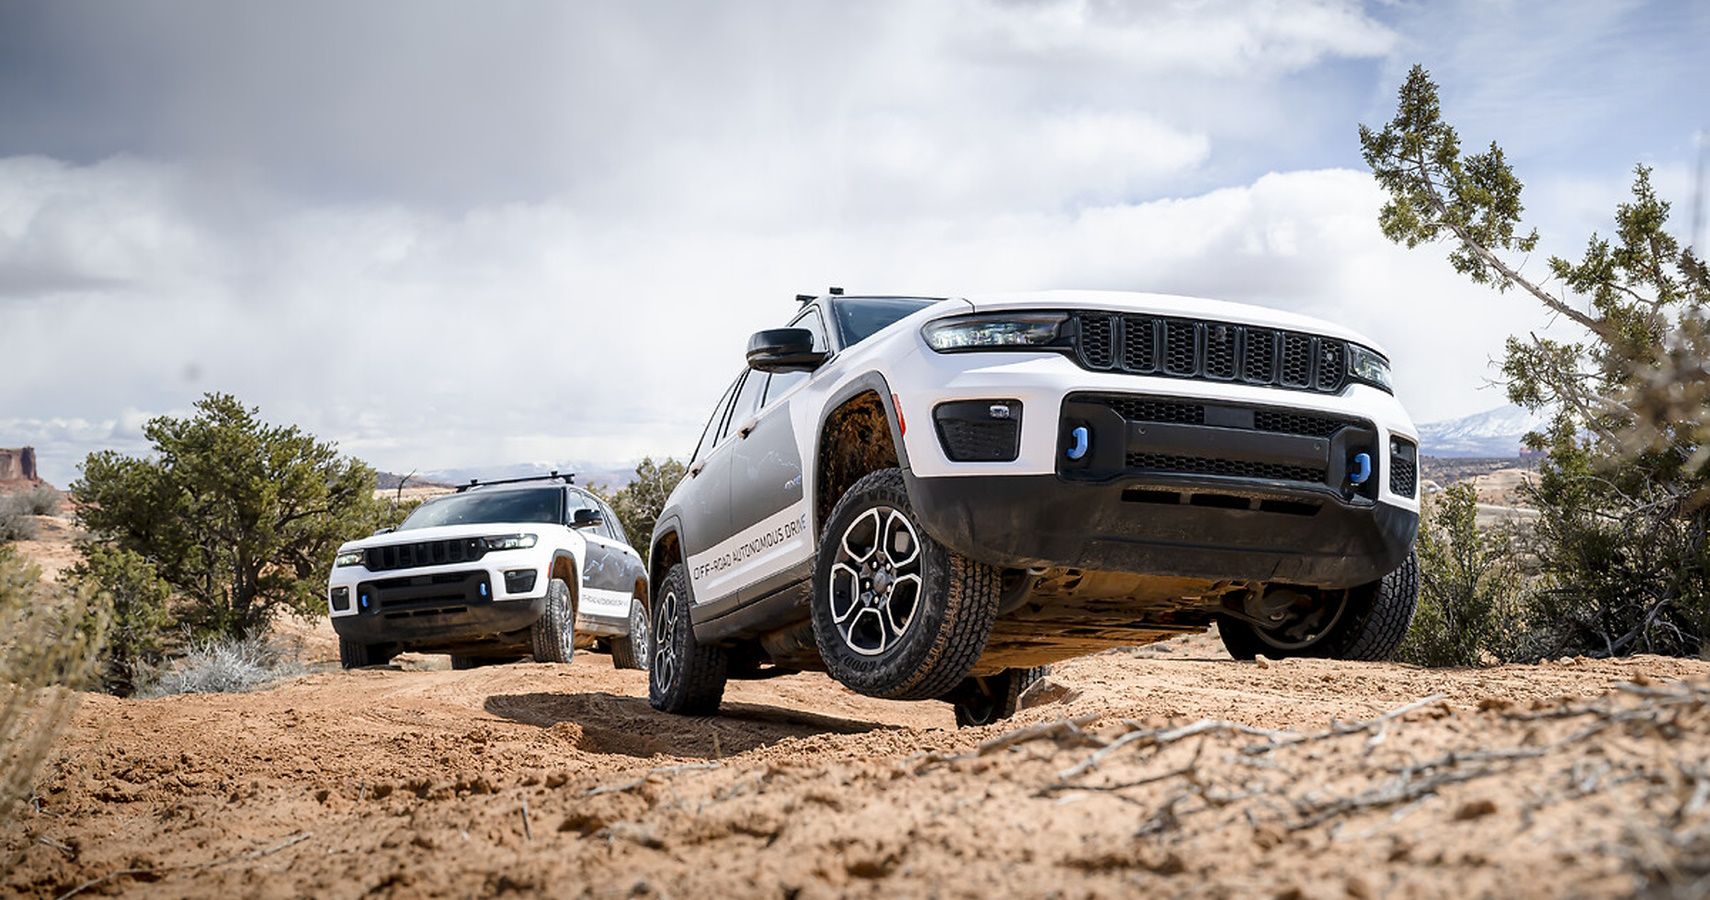 Two Jeep Grand Cherokee 4xe SUVs testing autonomous off-road driving technology in Moab, Utah